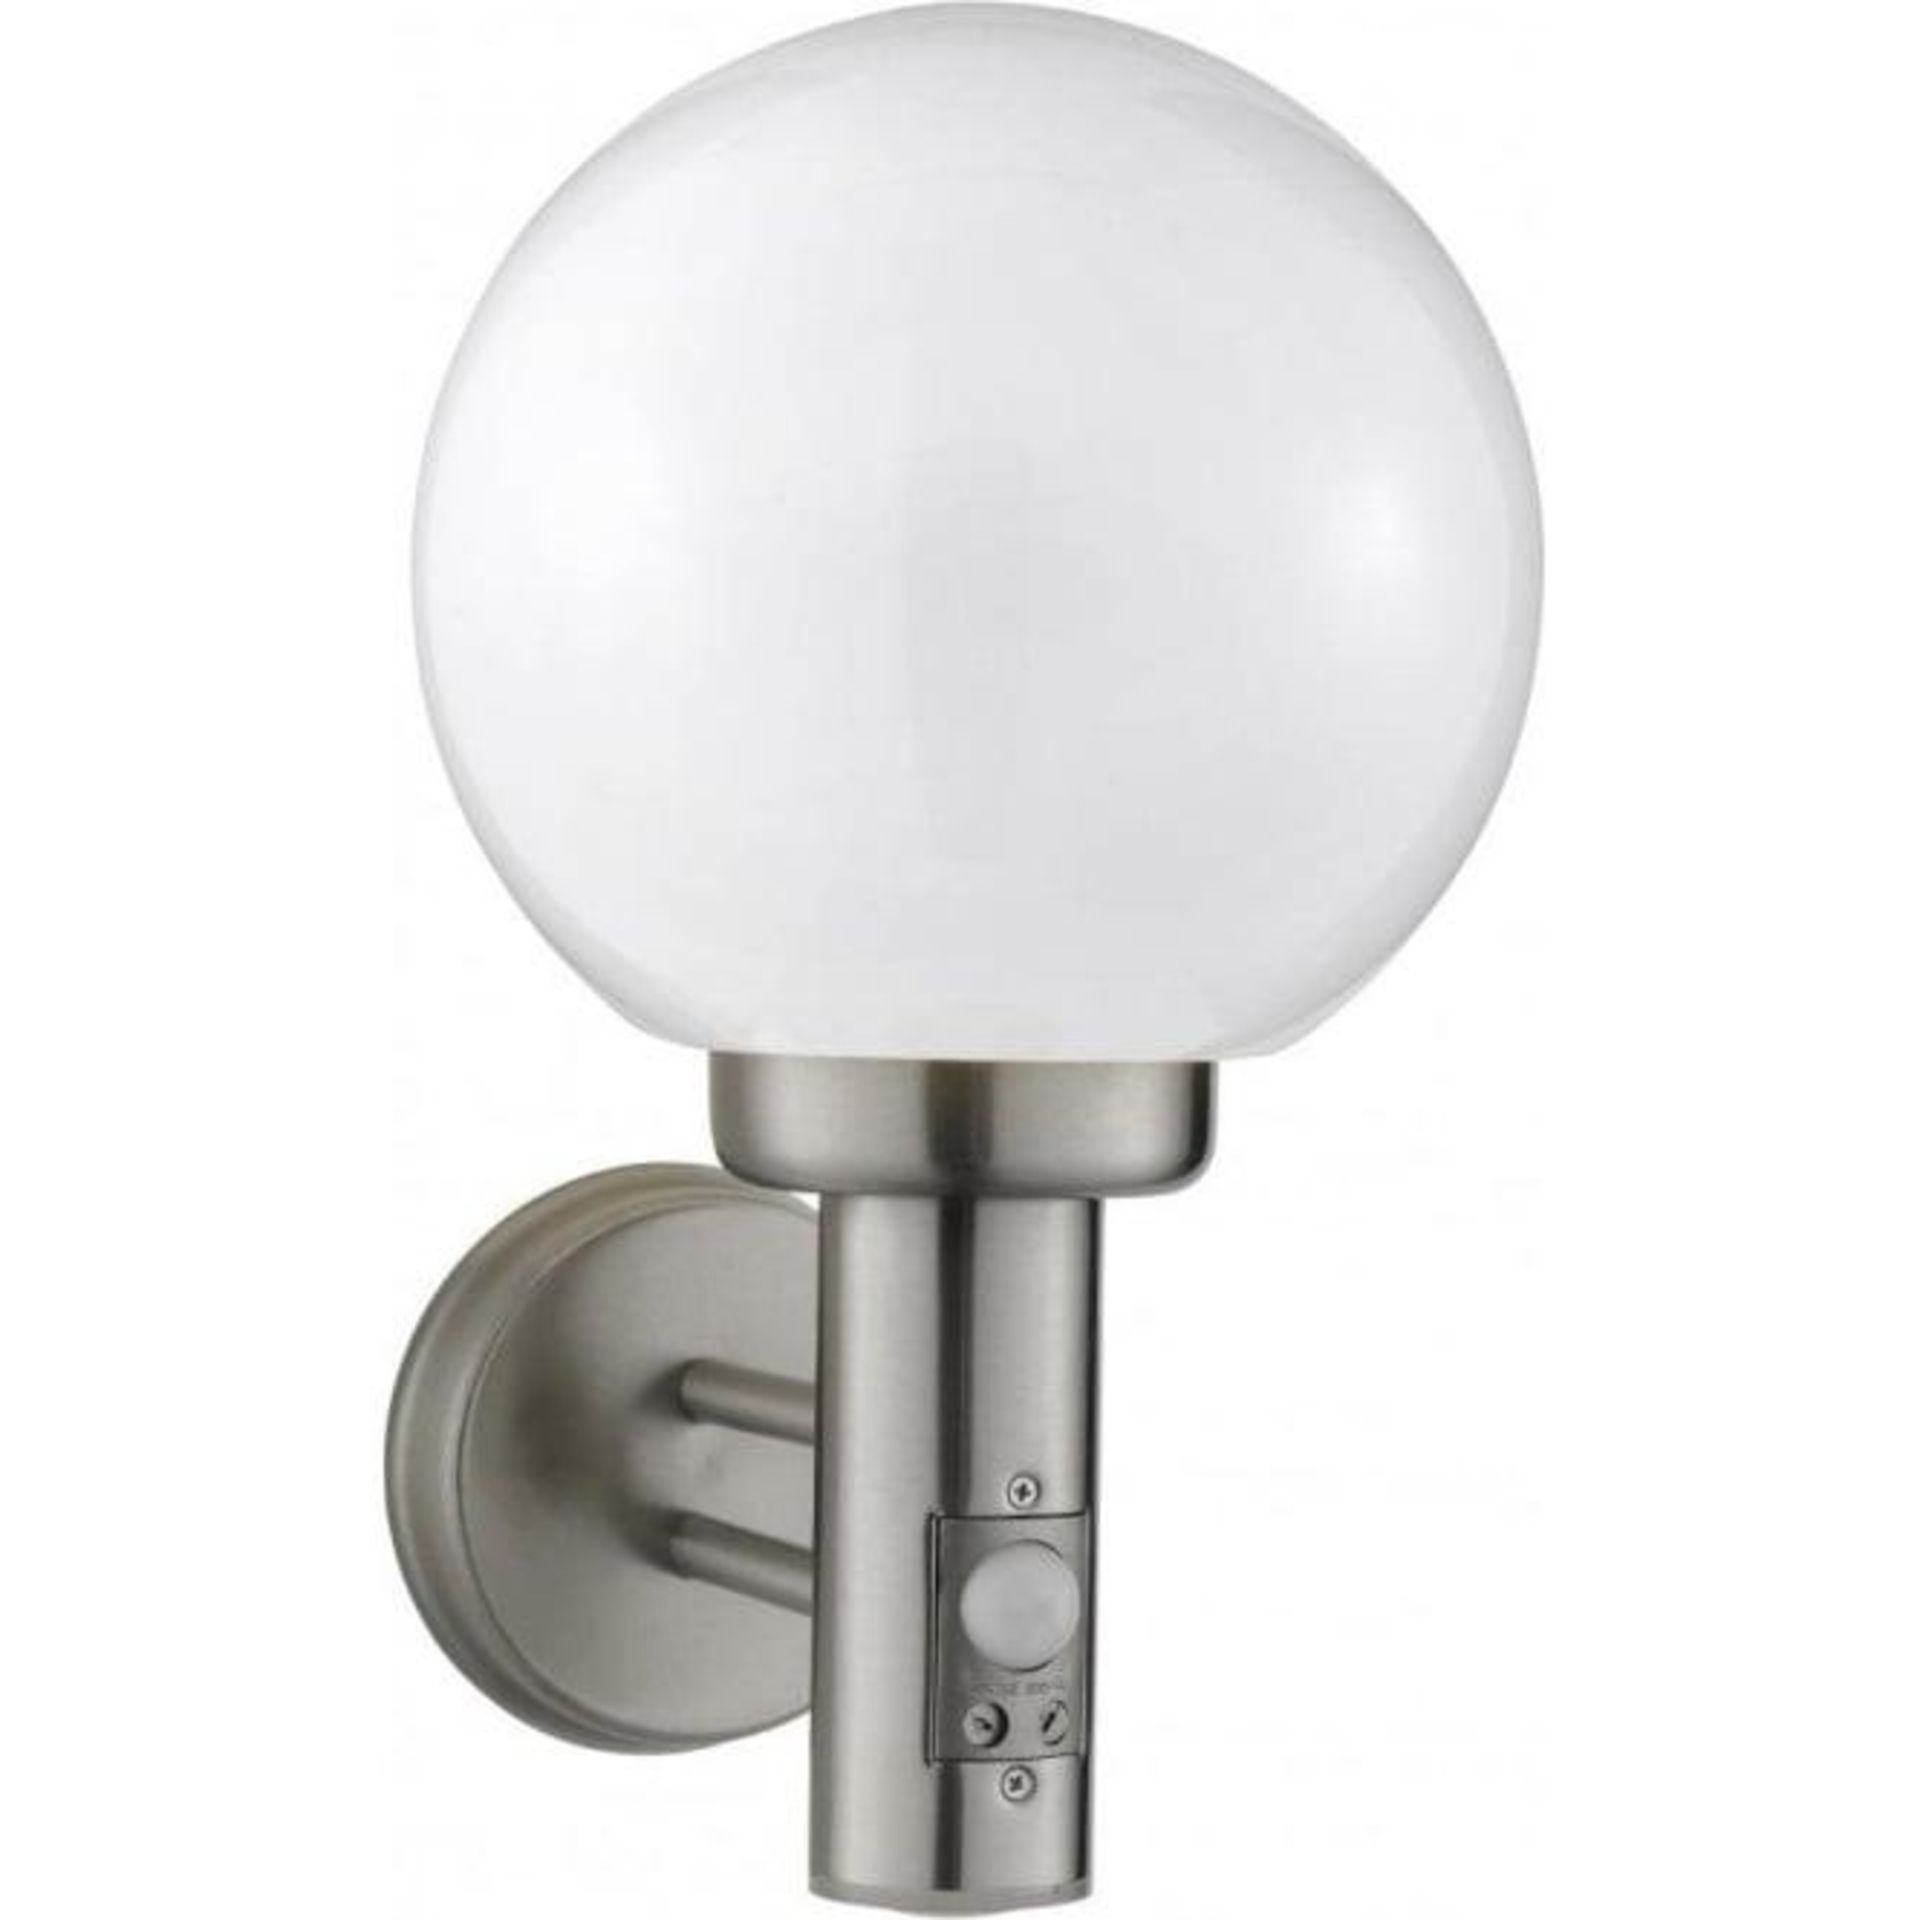 4 x Globe Outdoor Wall Light With PIR Motion Sensor - Stainless Steel With Polycarbonate Shade - IP4 - Image 3 of 6